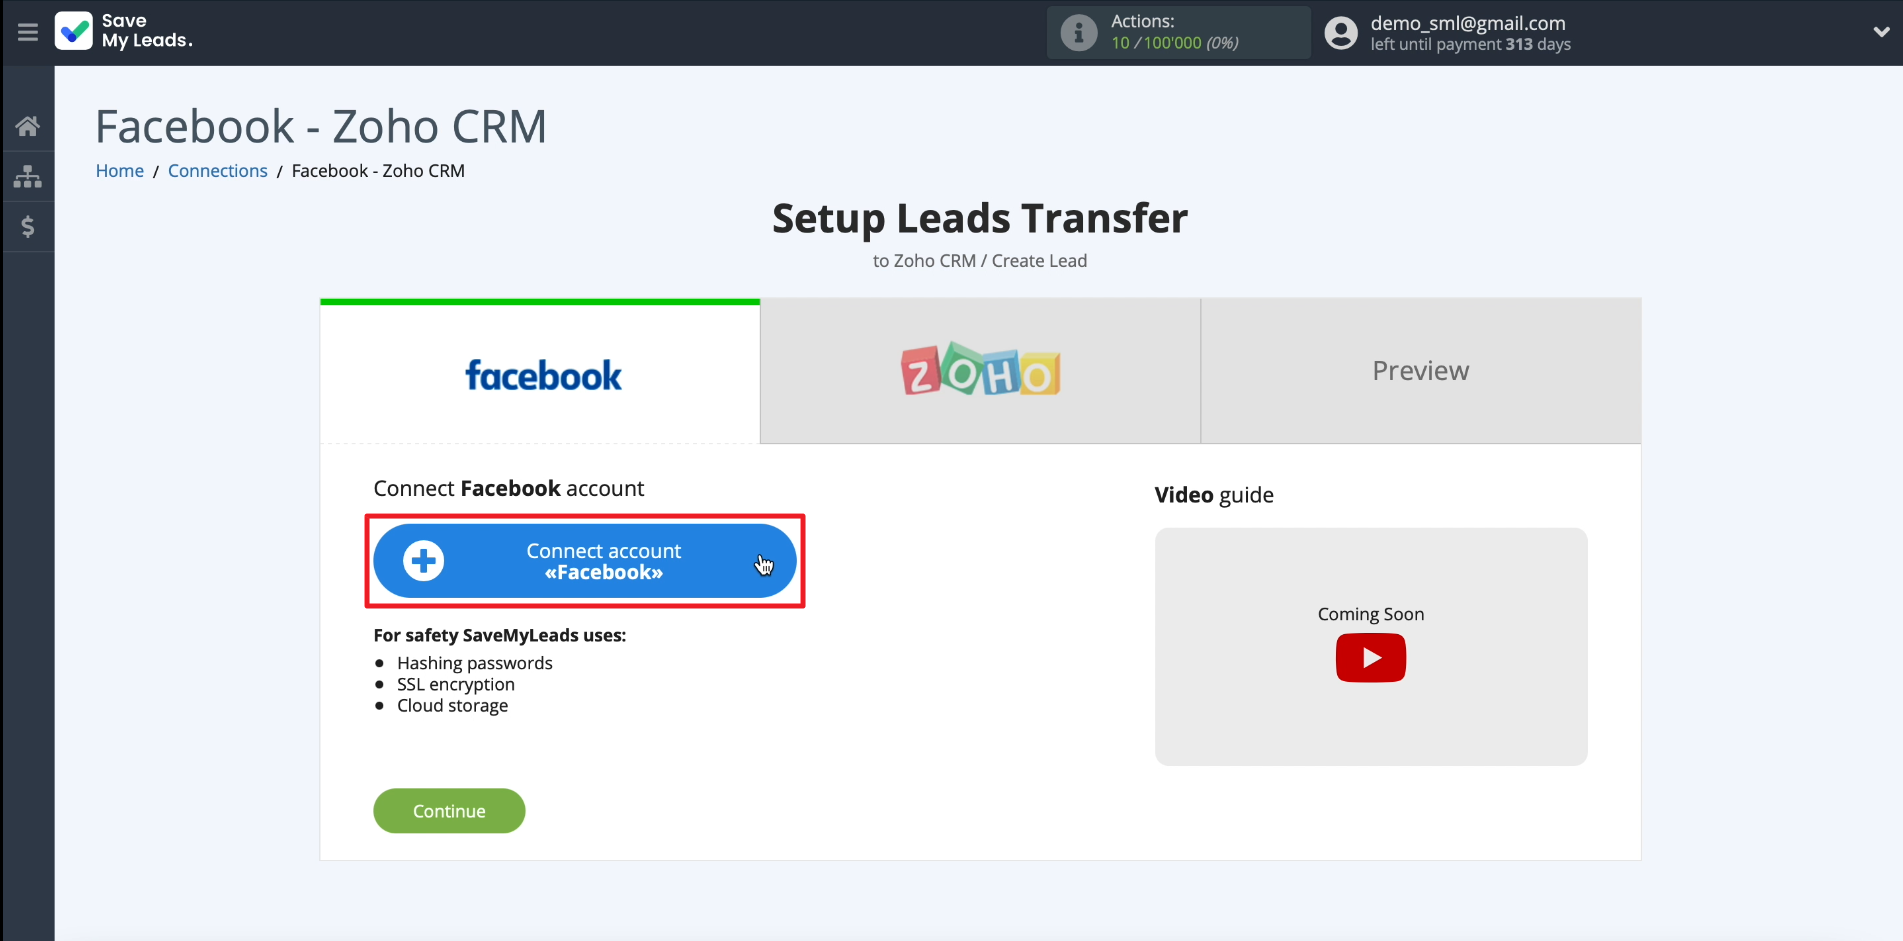 How to set up the upload of new leads from your Facebook ad account to Zoho CRM | Connect your Facebook account